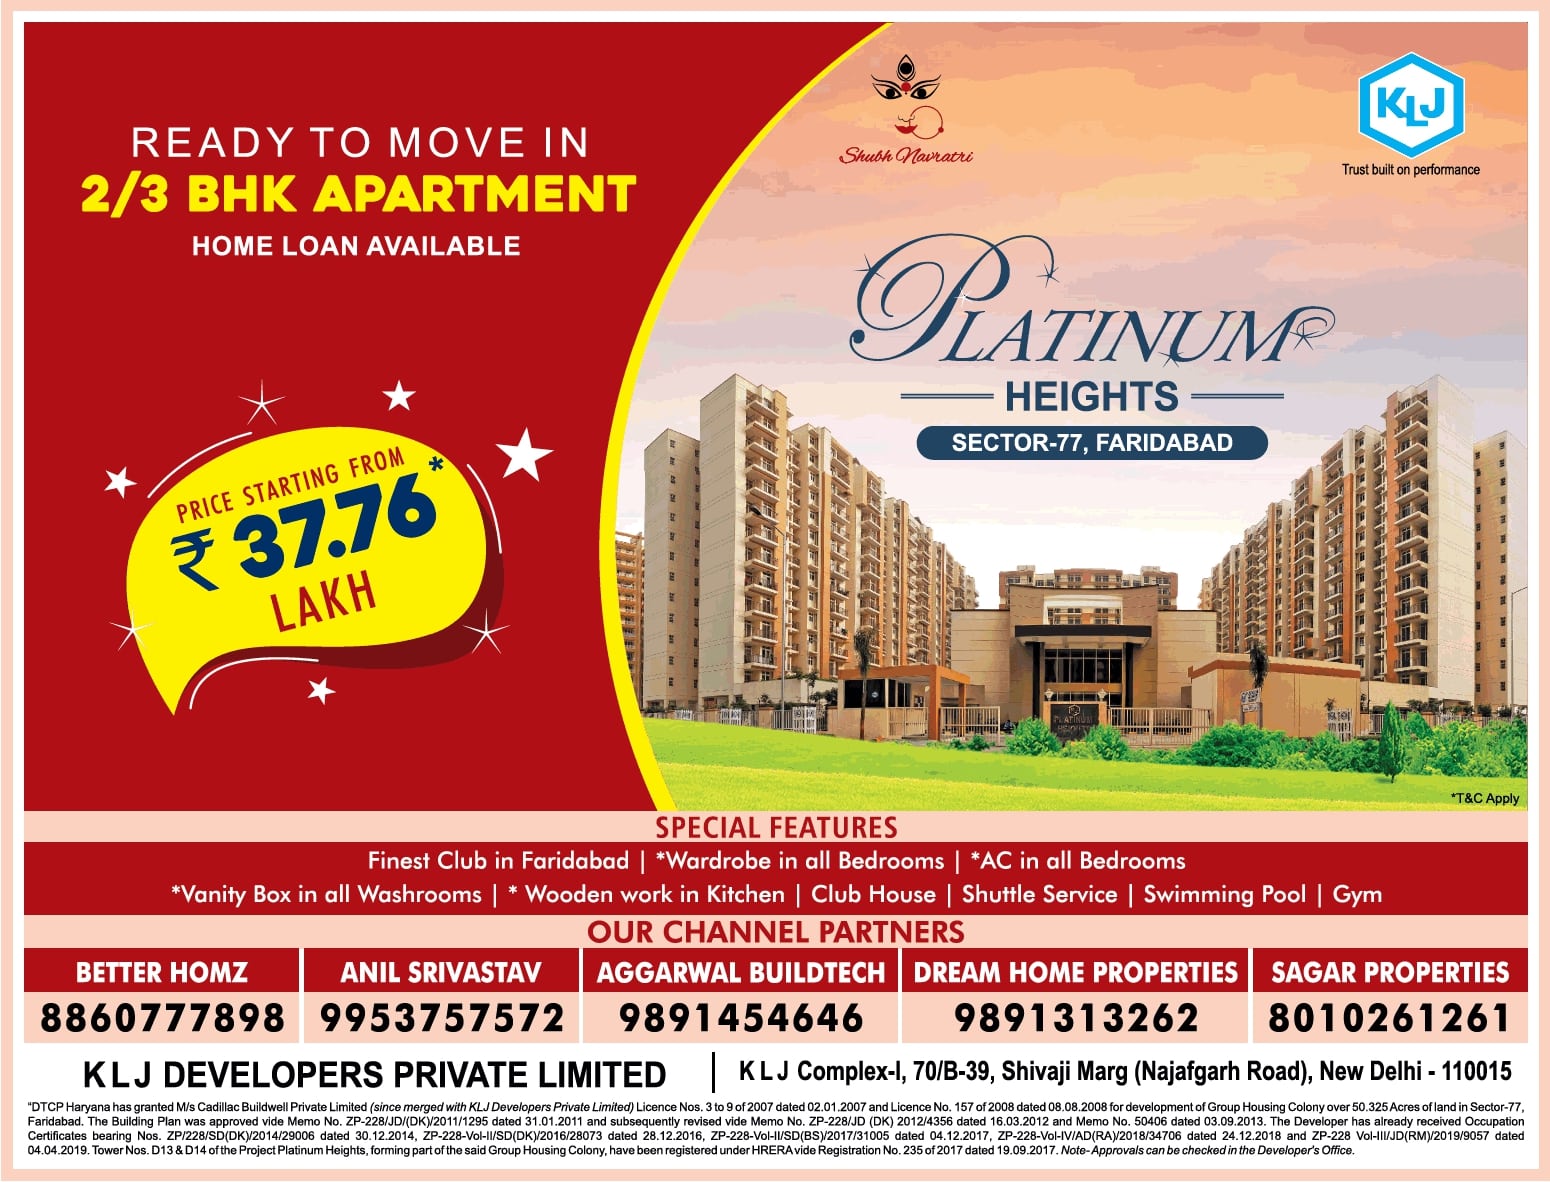 klj-developers-private-limited-ready-to-move-in-2-3-bhk-apartment-ad-delhi-times-16-04-2021